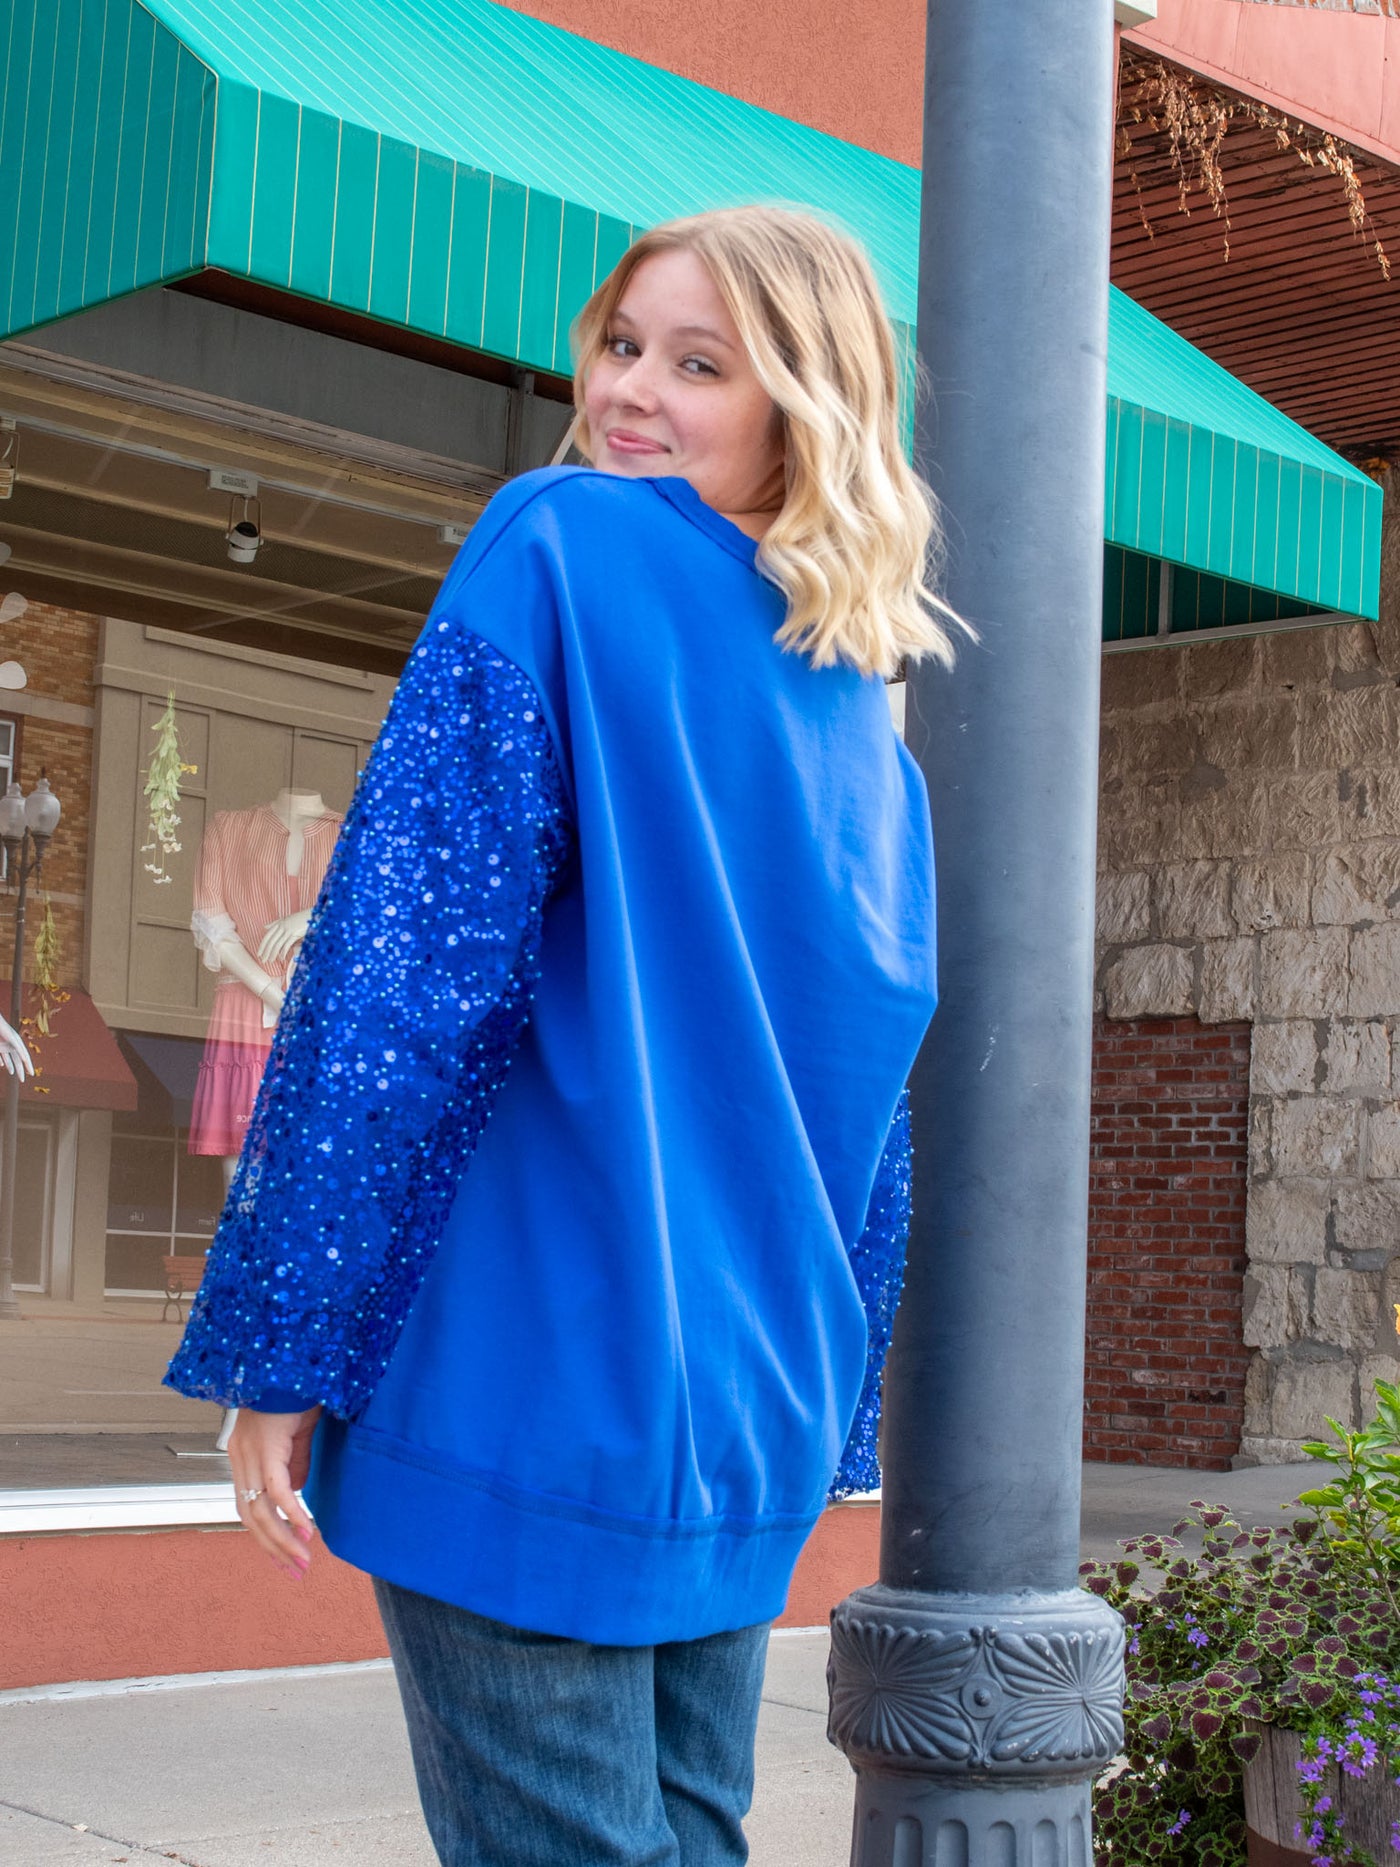 A model wearing a blue oversized sweatshirt with pearl and sparkle details. The model has it paired with a medium wash jean.